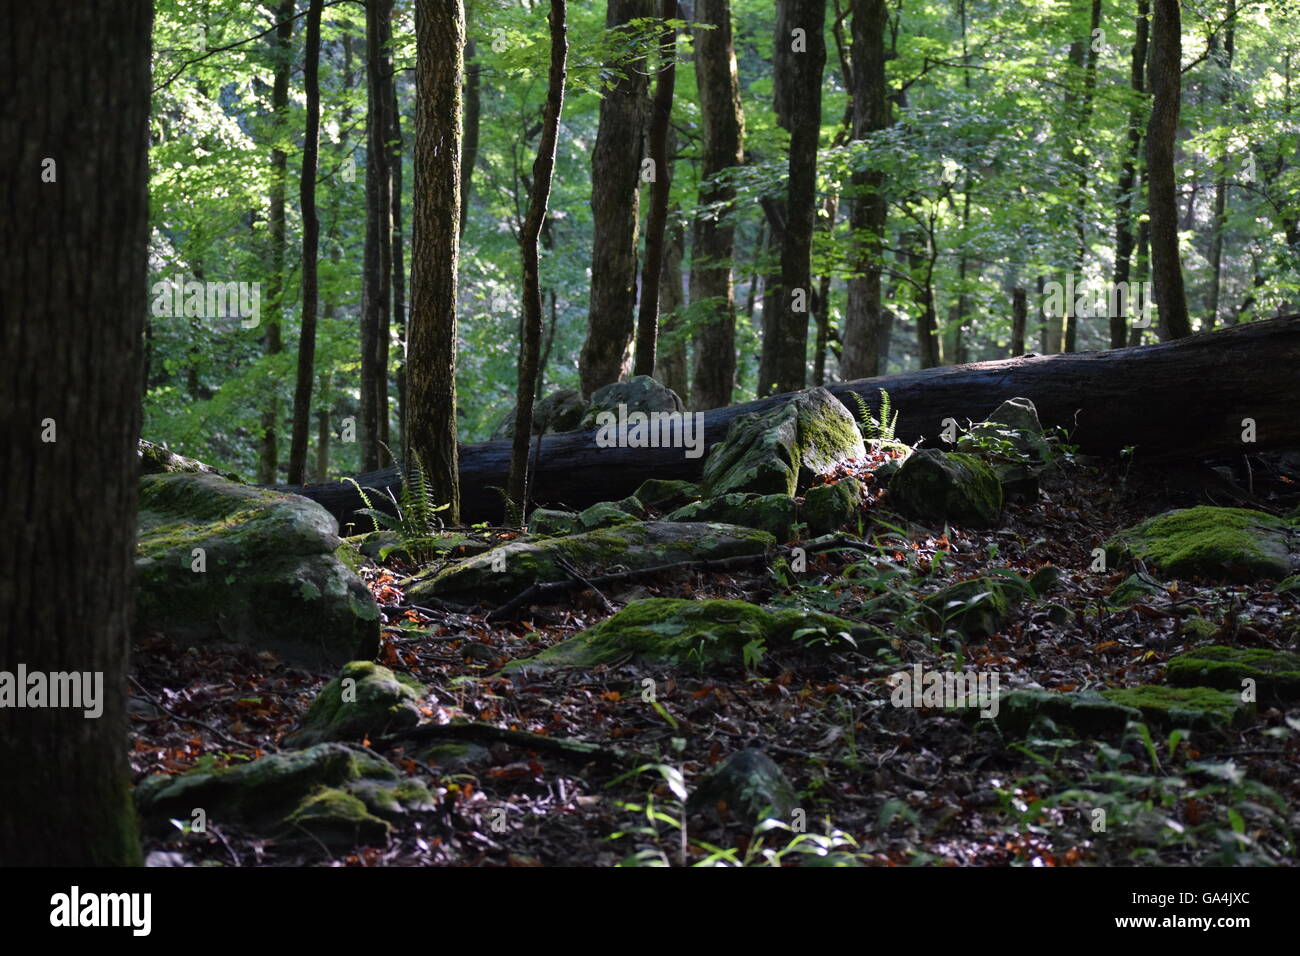 light shines on a rock in a forest Stock Photo